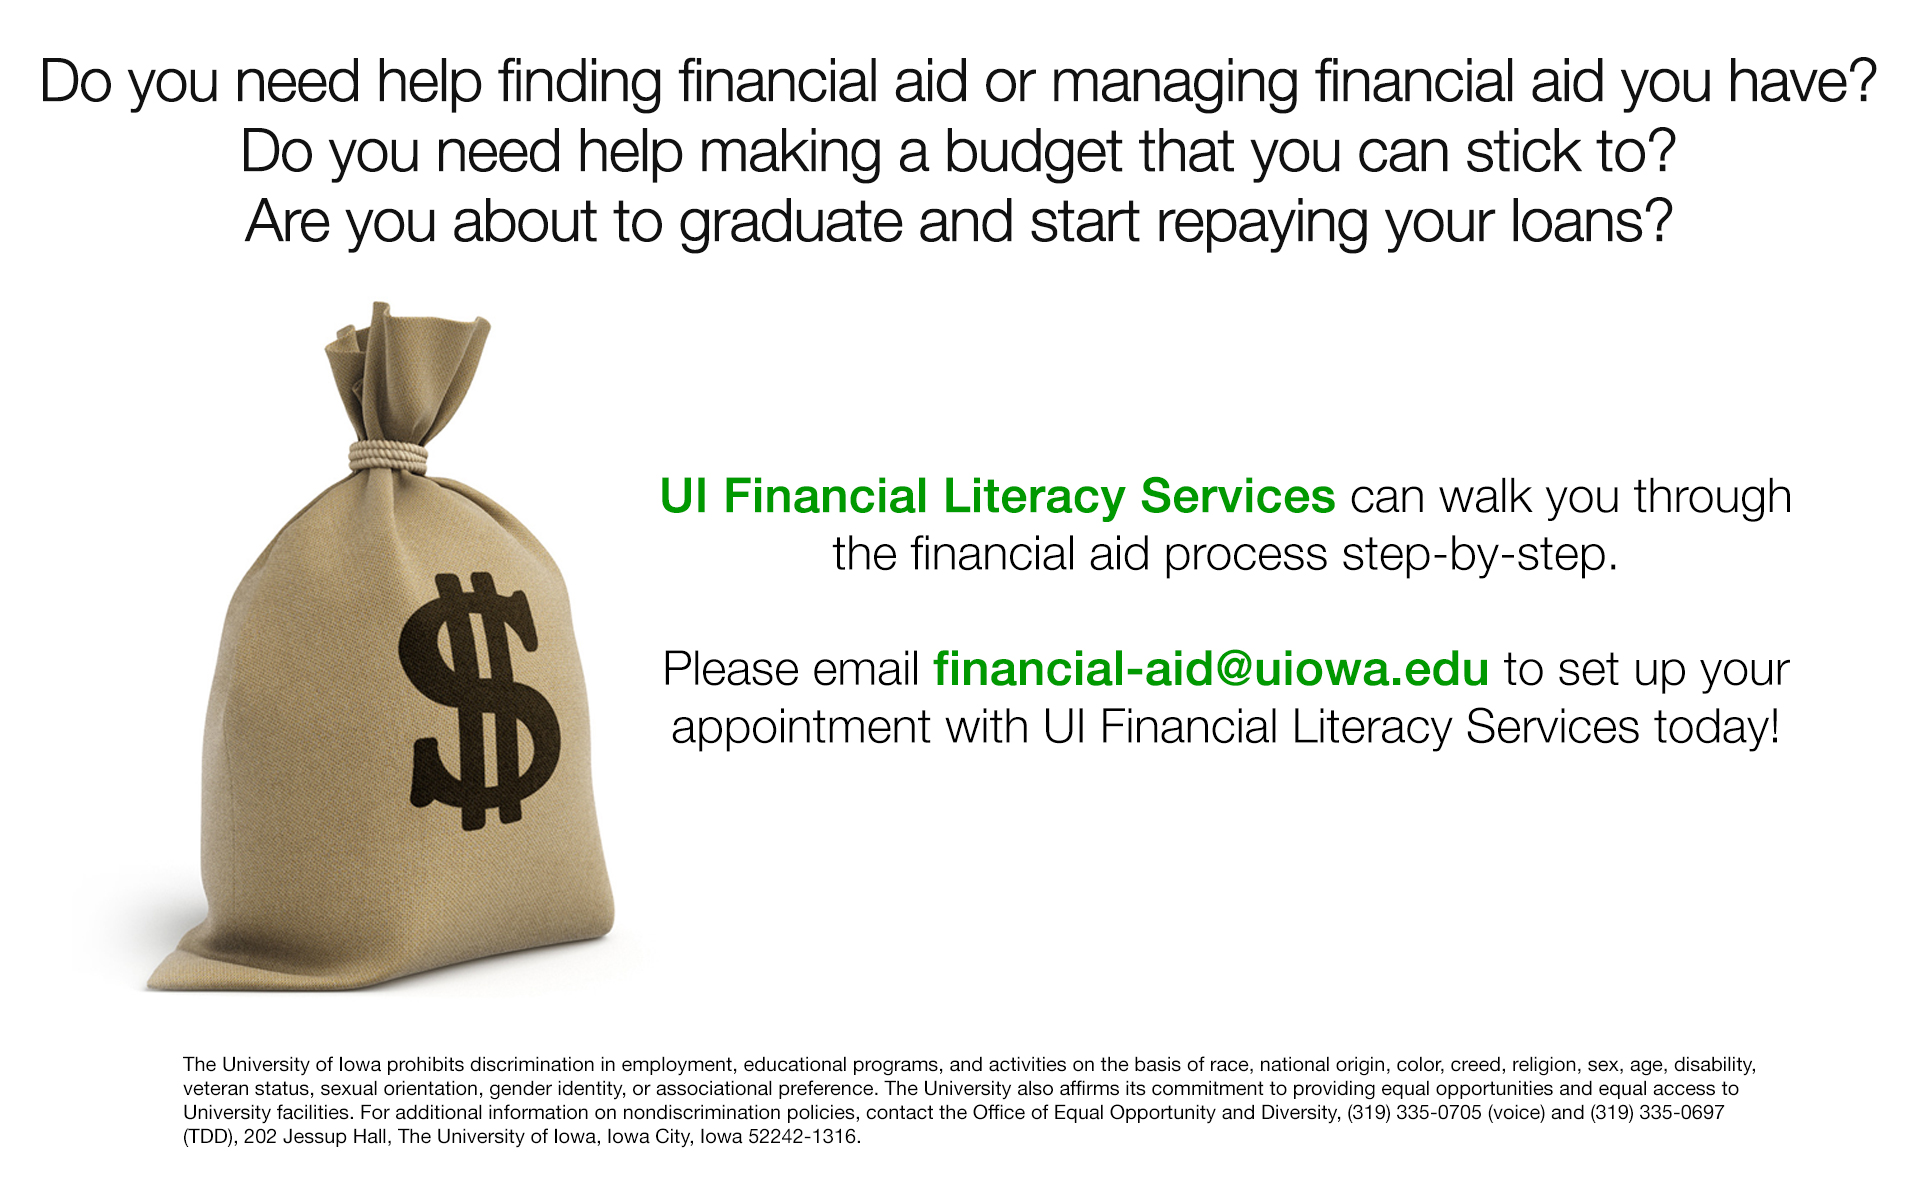 UI Financial Literacy Services can walk you through the financial aid process step-by-step. Please email financial-aid@uiowa.edu to set up your appointment with UI Financial Literacy Services today!